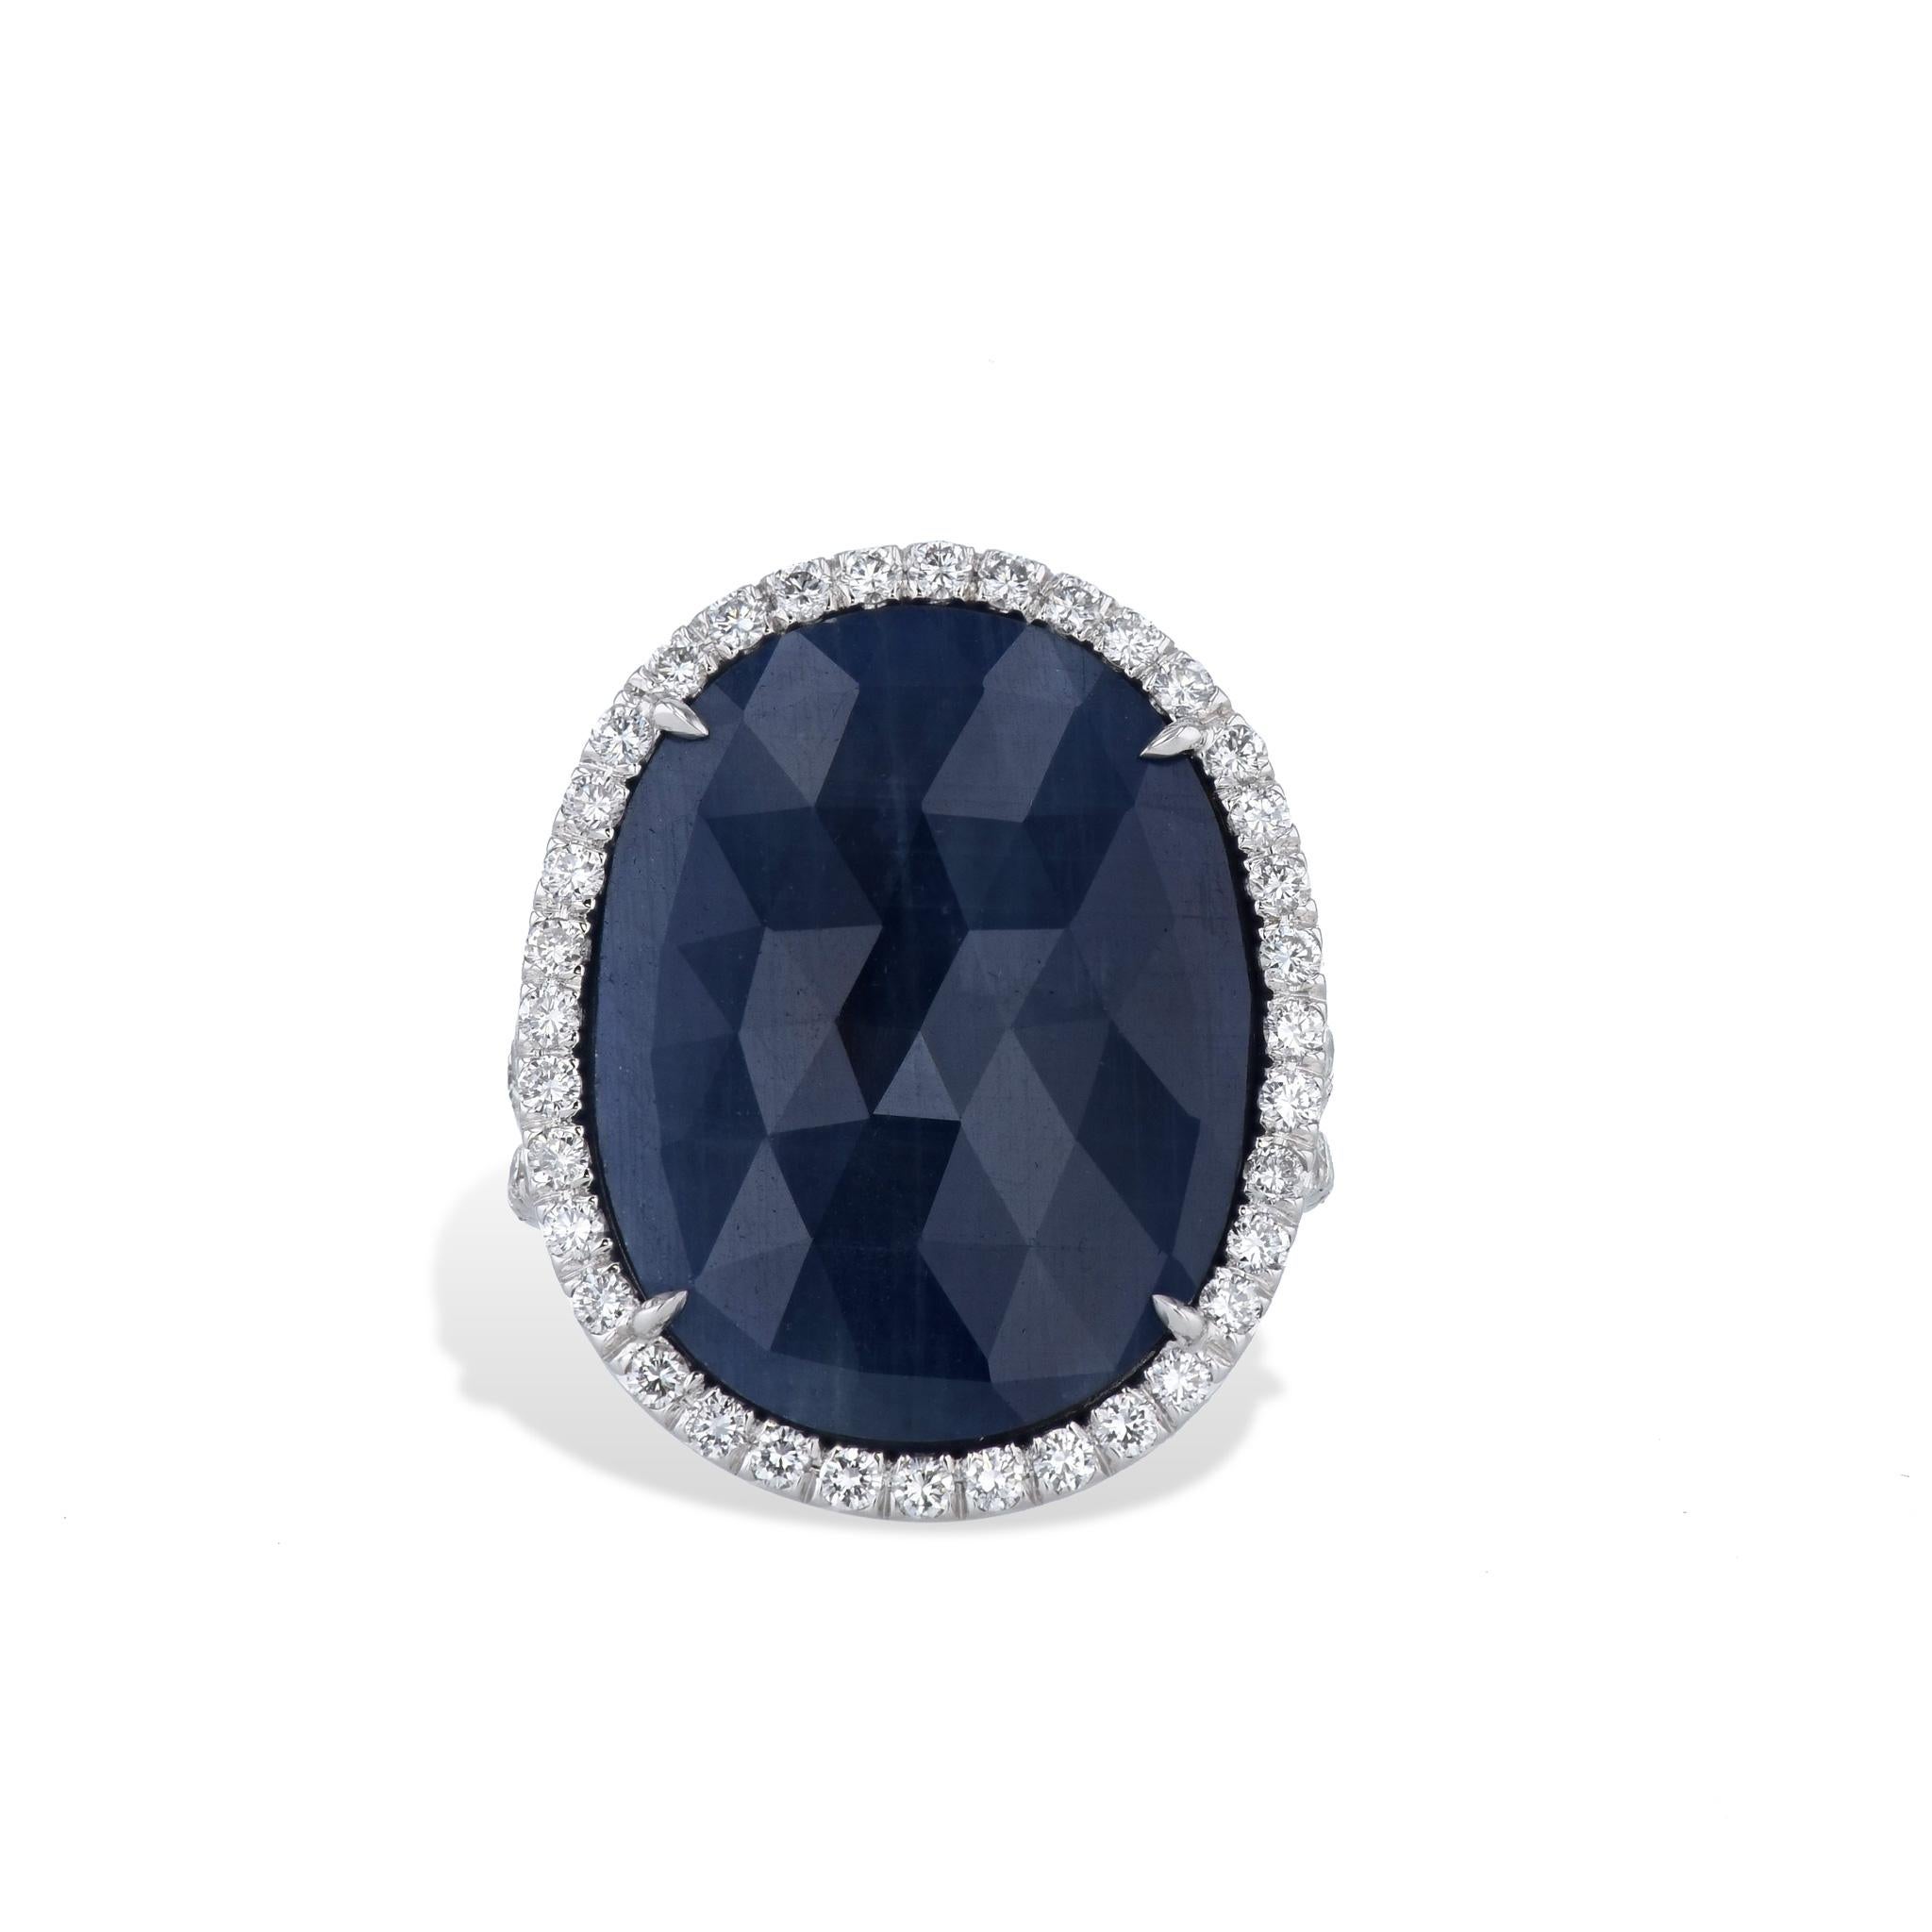 Handmade Sliced Blue Sapphire Diamond Pave Halo Cocktail Ring 18 Karat Gold  In New Condition For Sale In Miami, FL